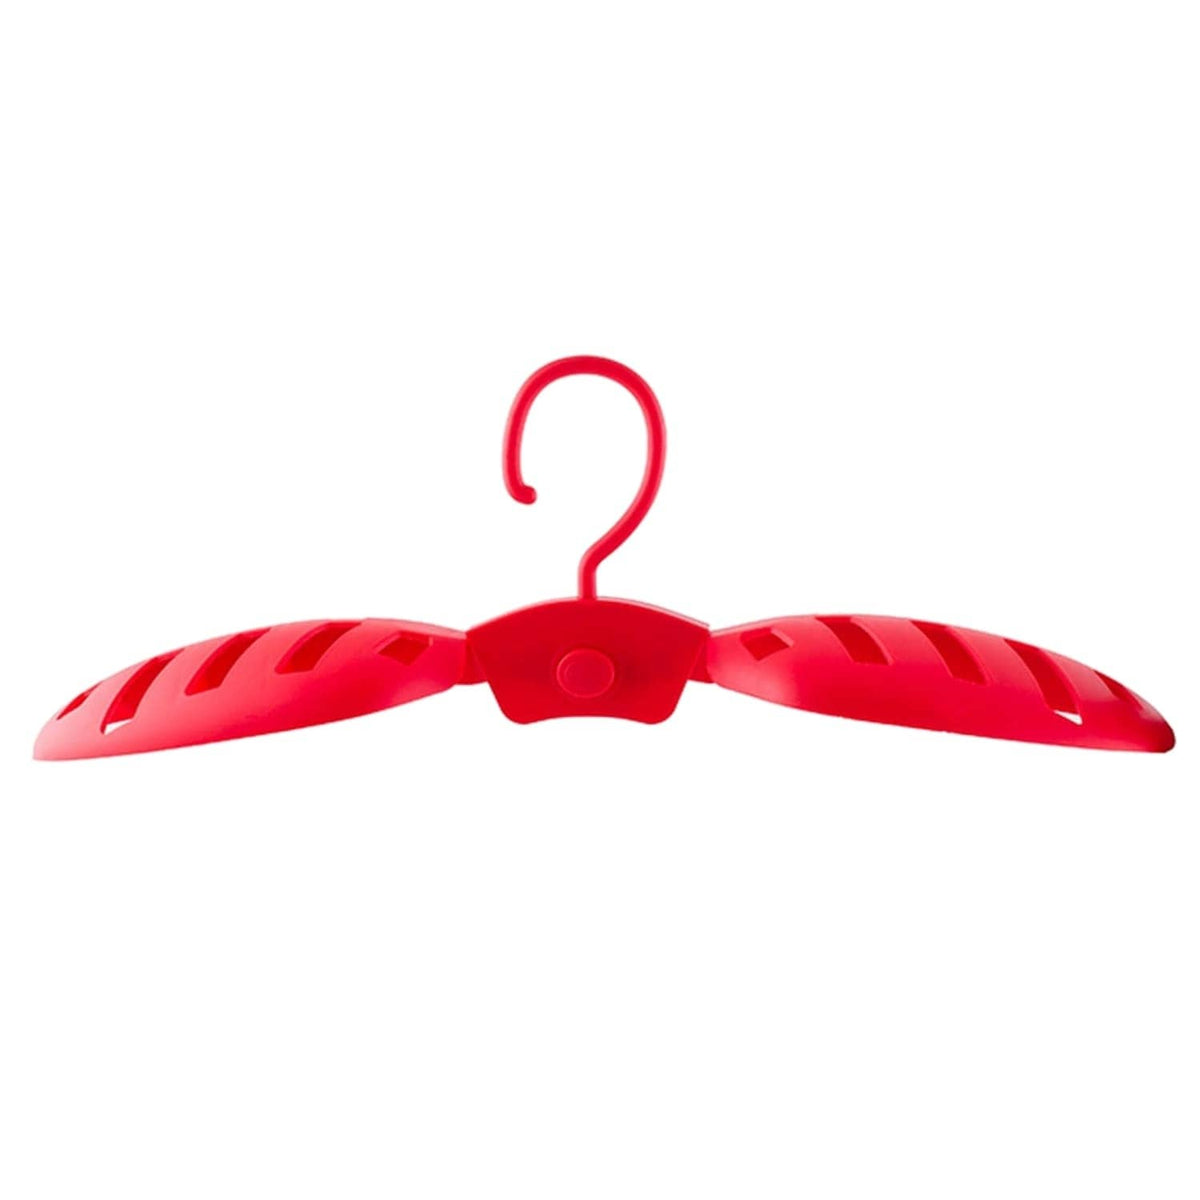 Ocean and Earth Quick Dry Wetsuit Hanger Red - Gifts for Surfers by Ocean and Earth